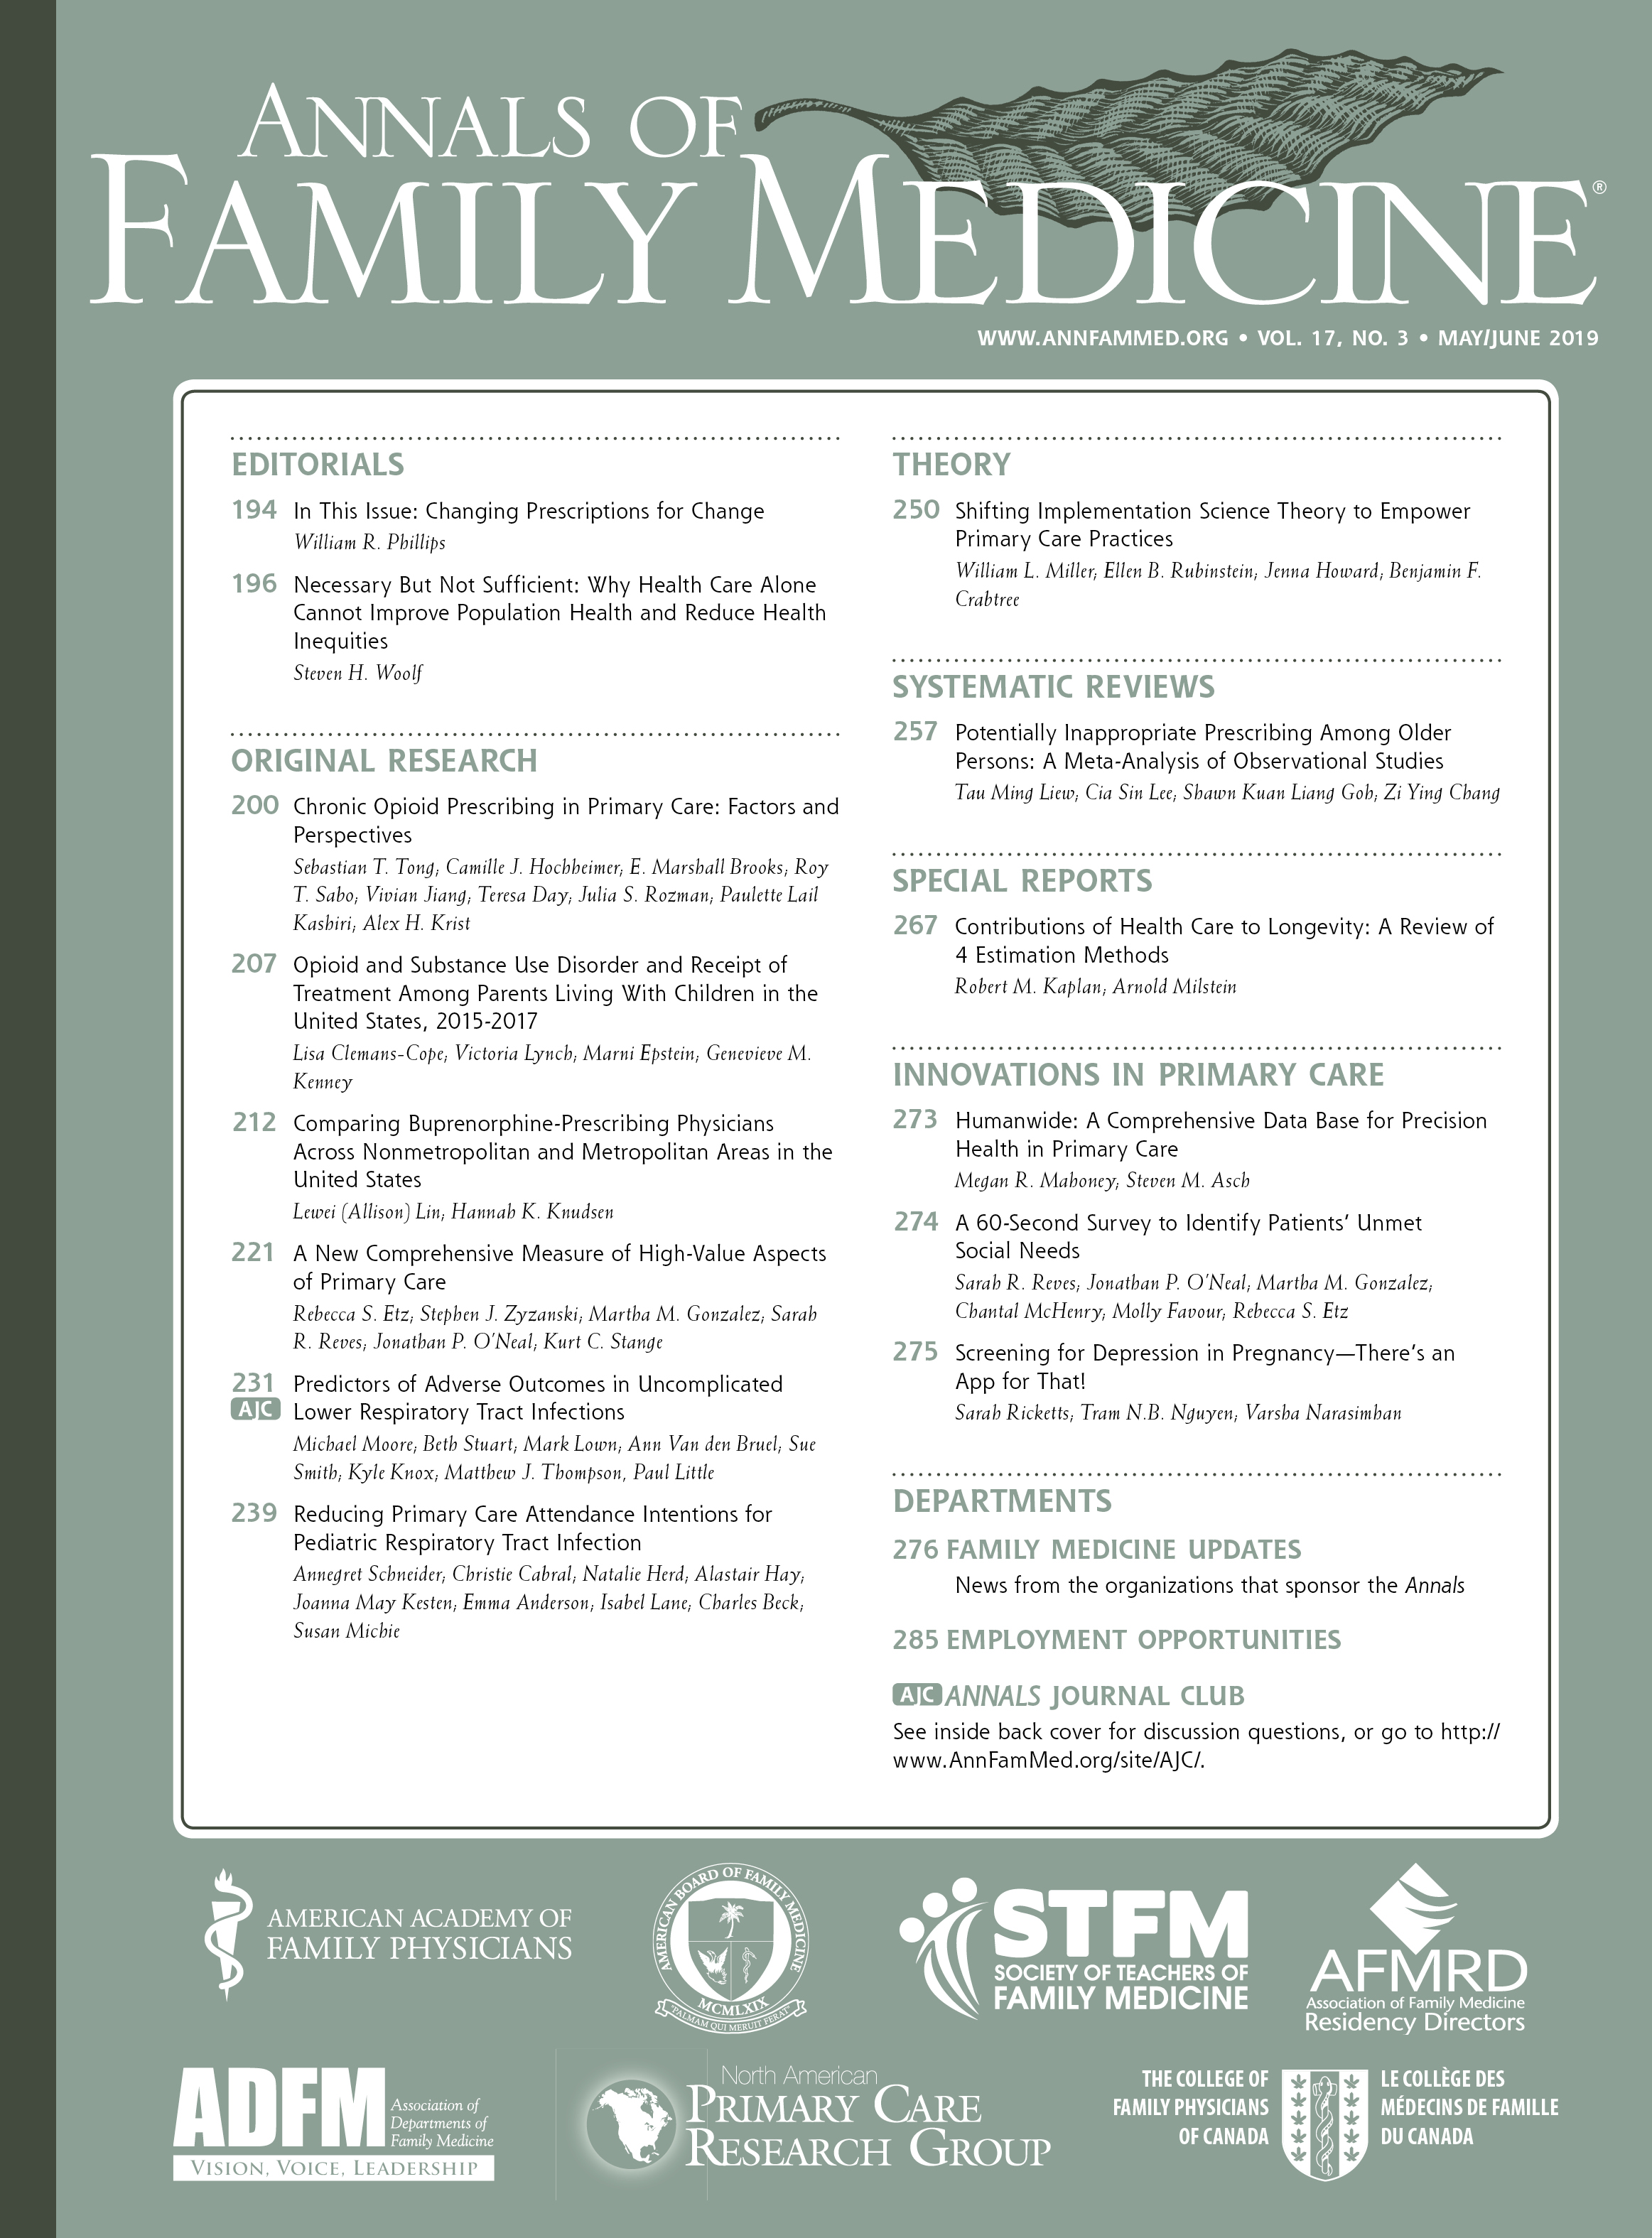 Paternal Perspectives on Latino and Black Sons Readiness for Sex and Condom Guidance: A Mixed Methods Study [Original Research]